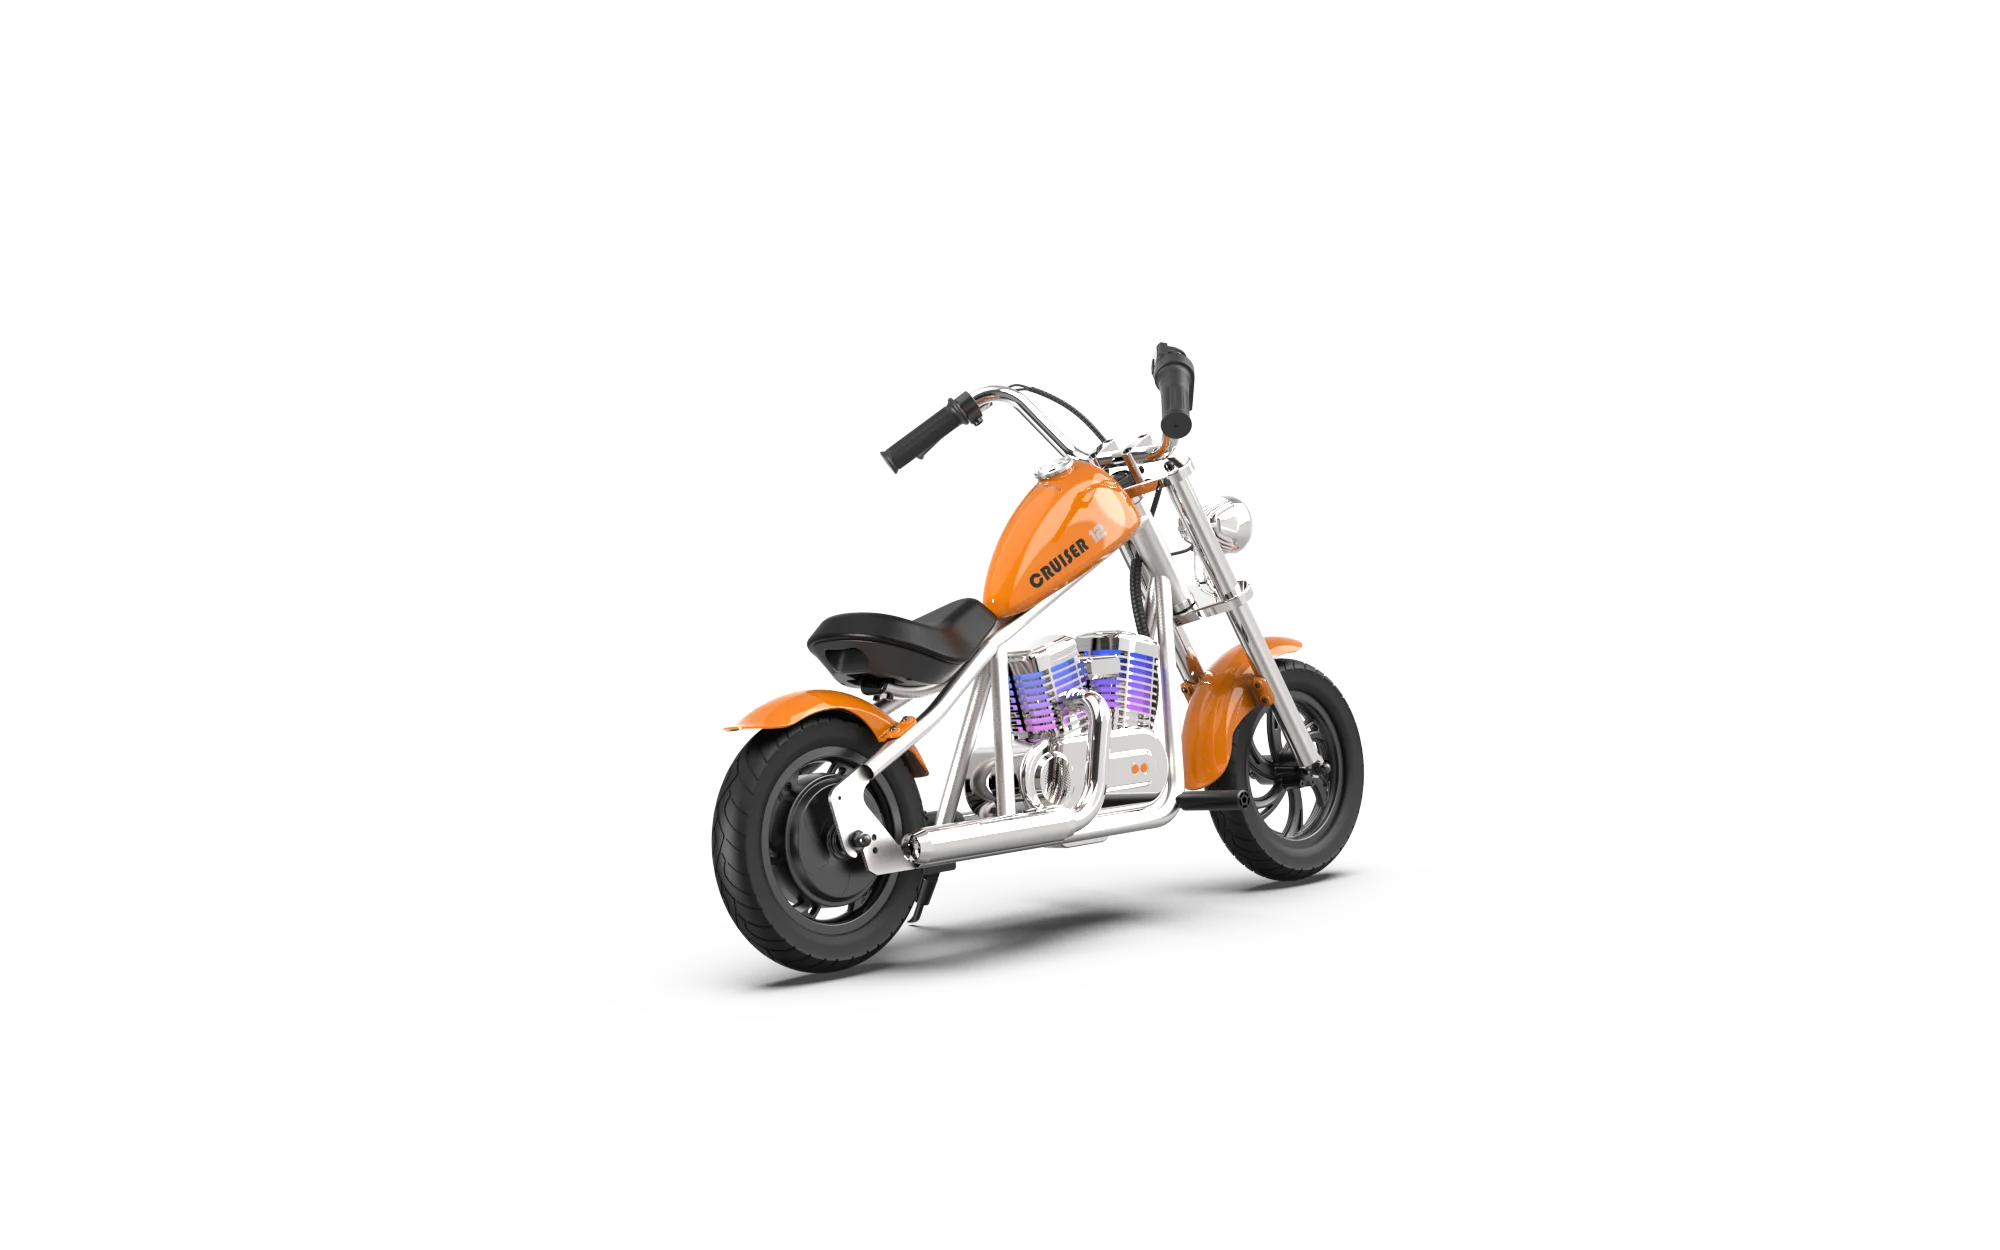 https://ae01.alicdn.com/kf/S57e4bd9f65da4d648b211bc5deed1dc8X/Electric-Motorcycle-for-Kids-Hyper-gogo-Cruiser-12-Pro.png